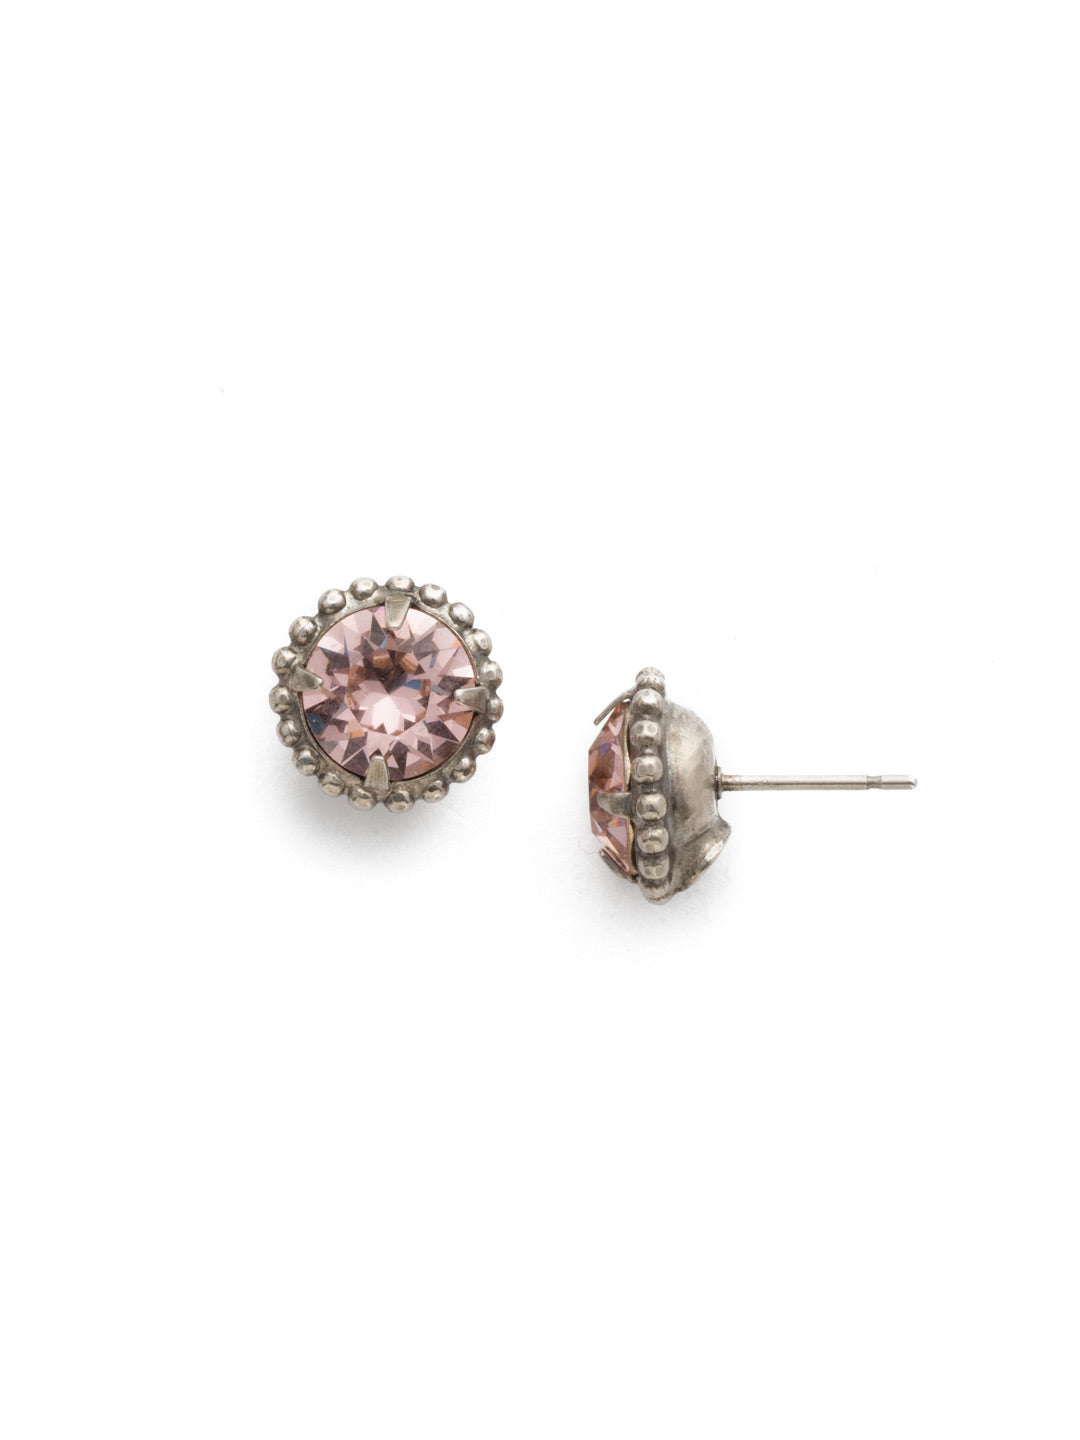 Simplicity Stud Earrings - EBY38ASVIN - <p>A timeless classic, the Simplicity Stud Earrings feature round cut crystals in a variety of colors; accented with a halo of metal beaded detail. Need help picking a stud? <a href="https://www.sorrelli.com/blogs/sisterhood/round-stud-earrings-101-a-rundown-of-sizes-styles-and-sparkle">Check out our size guide!</a> From Sorrelli's Vintage Rose collection in our Antique Silver-tone finish.</p>